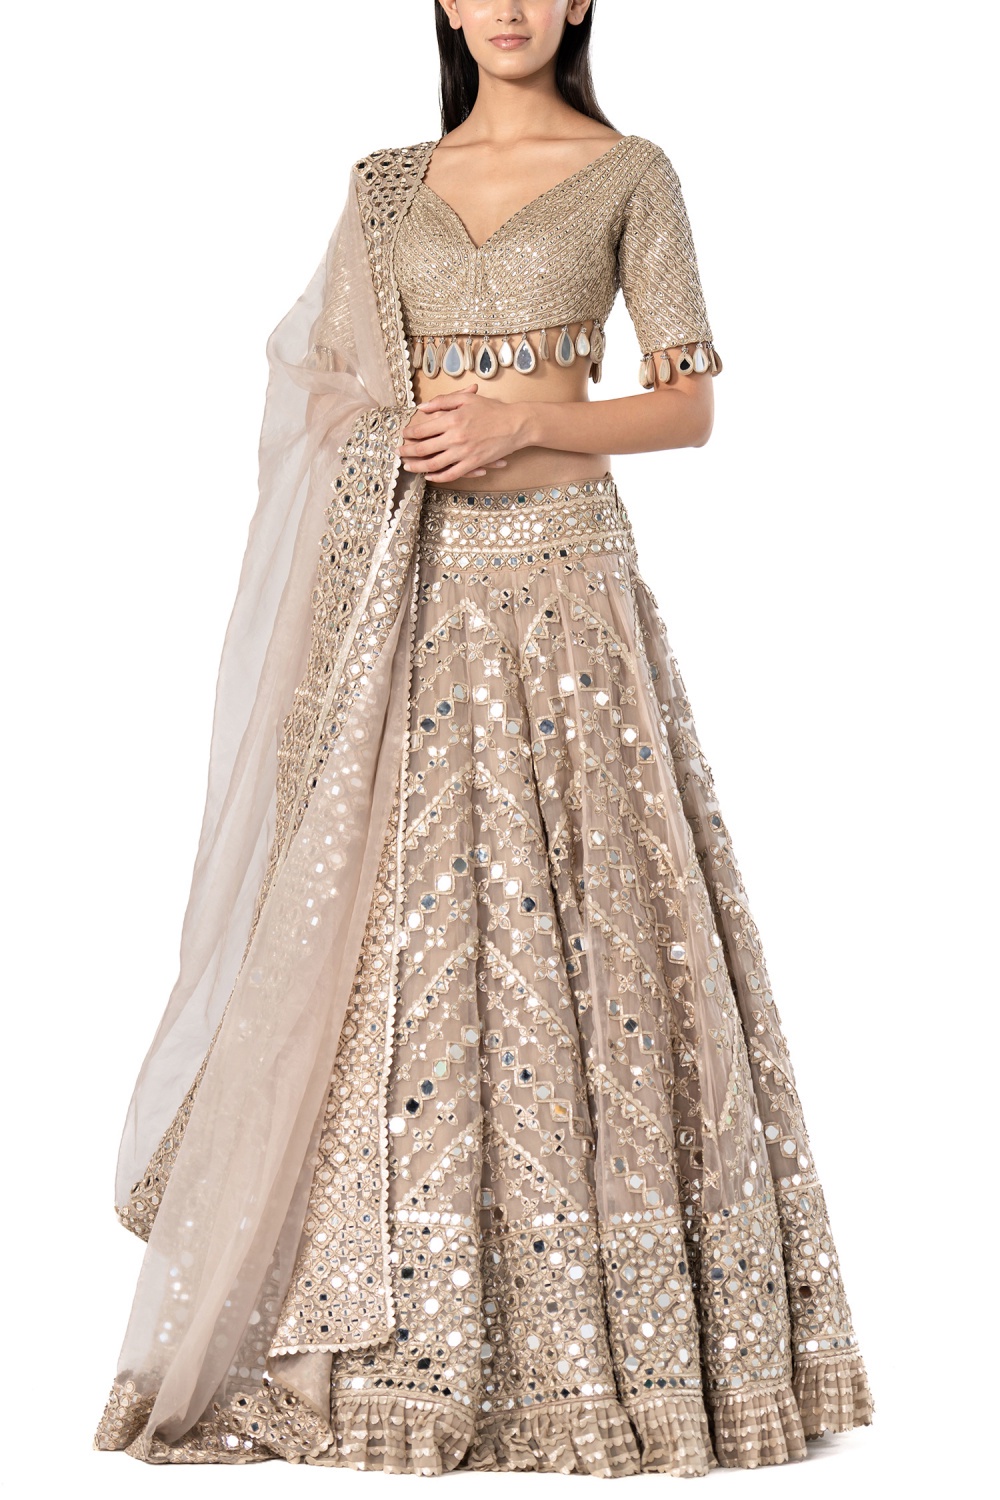 The Ultimate Guide to Buying Lehengas Online